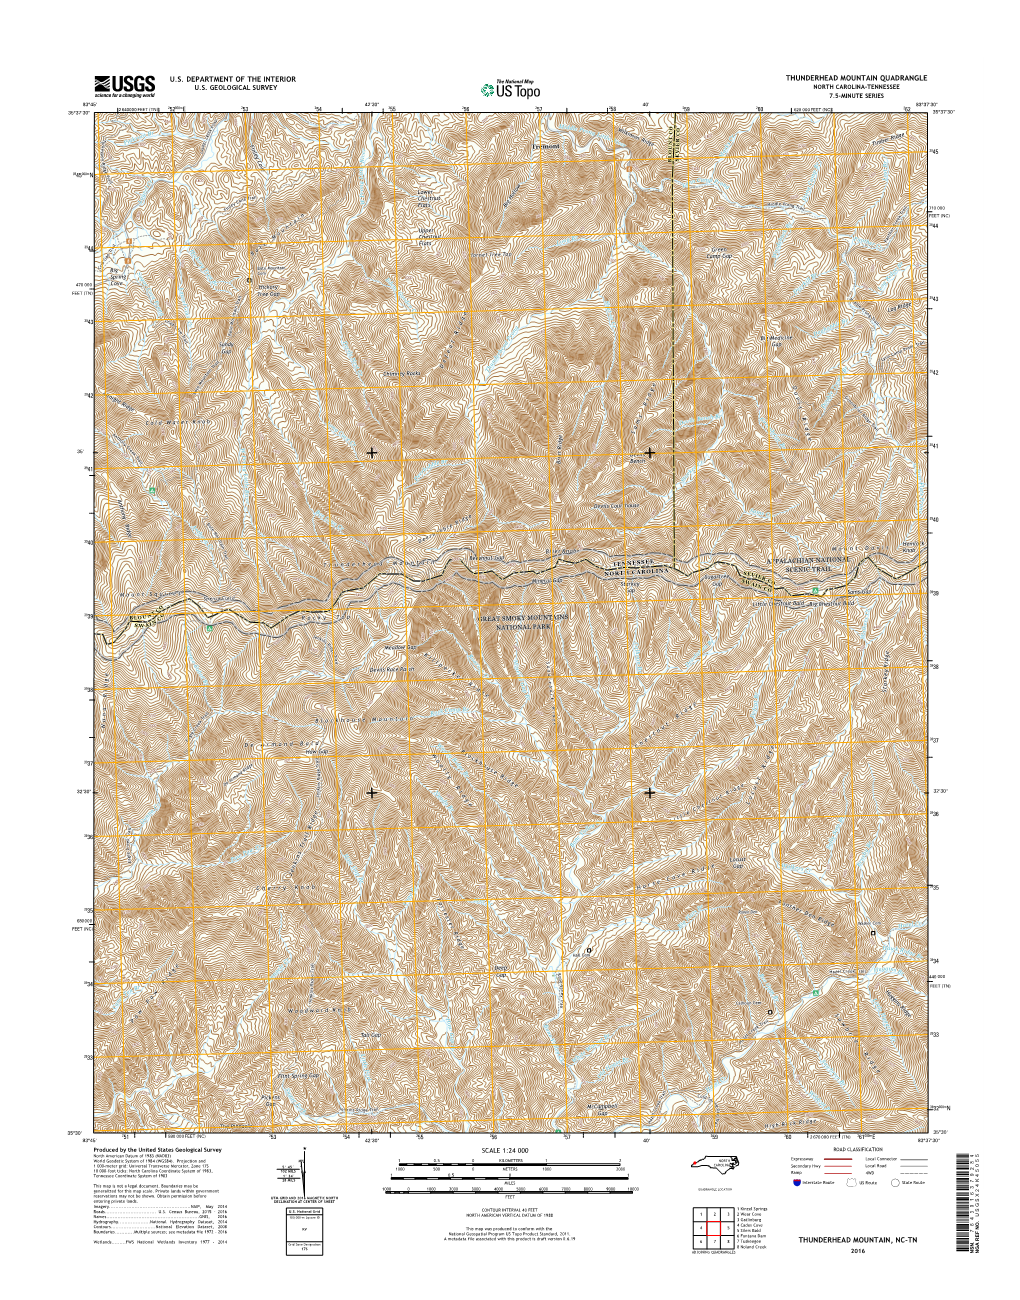 USGS 7.5-Minute Image Map for Thunderhead Mountain, North